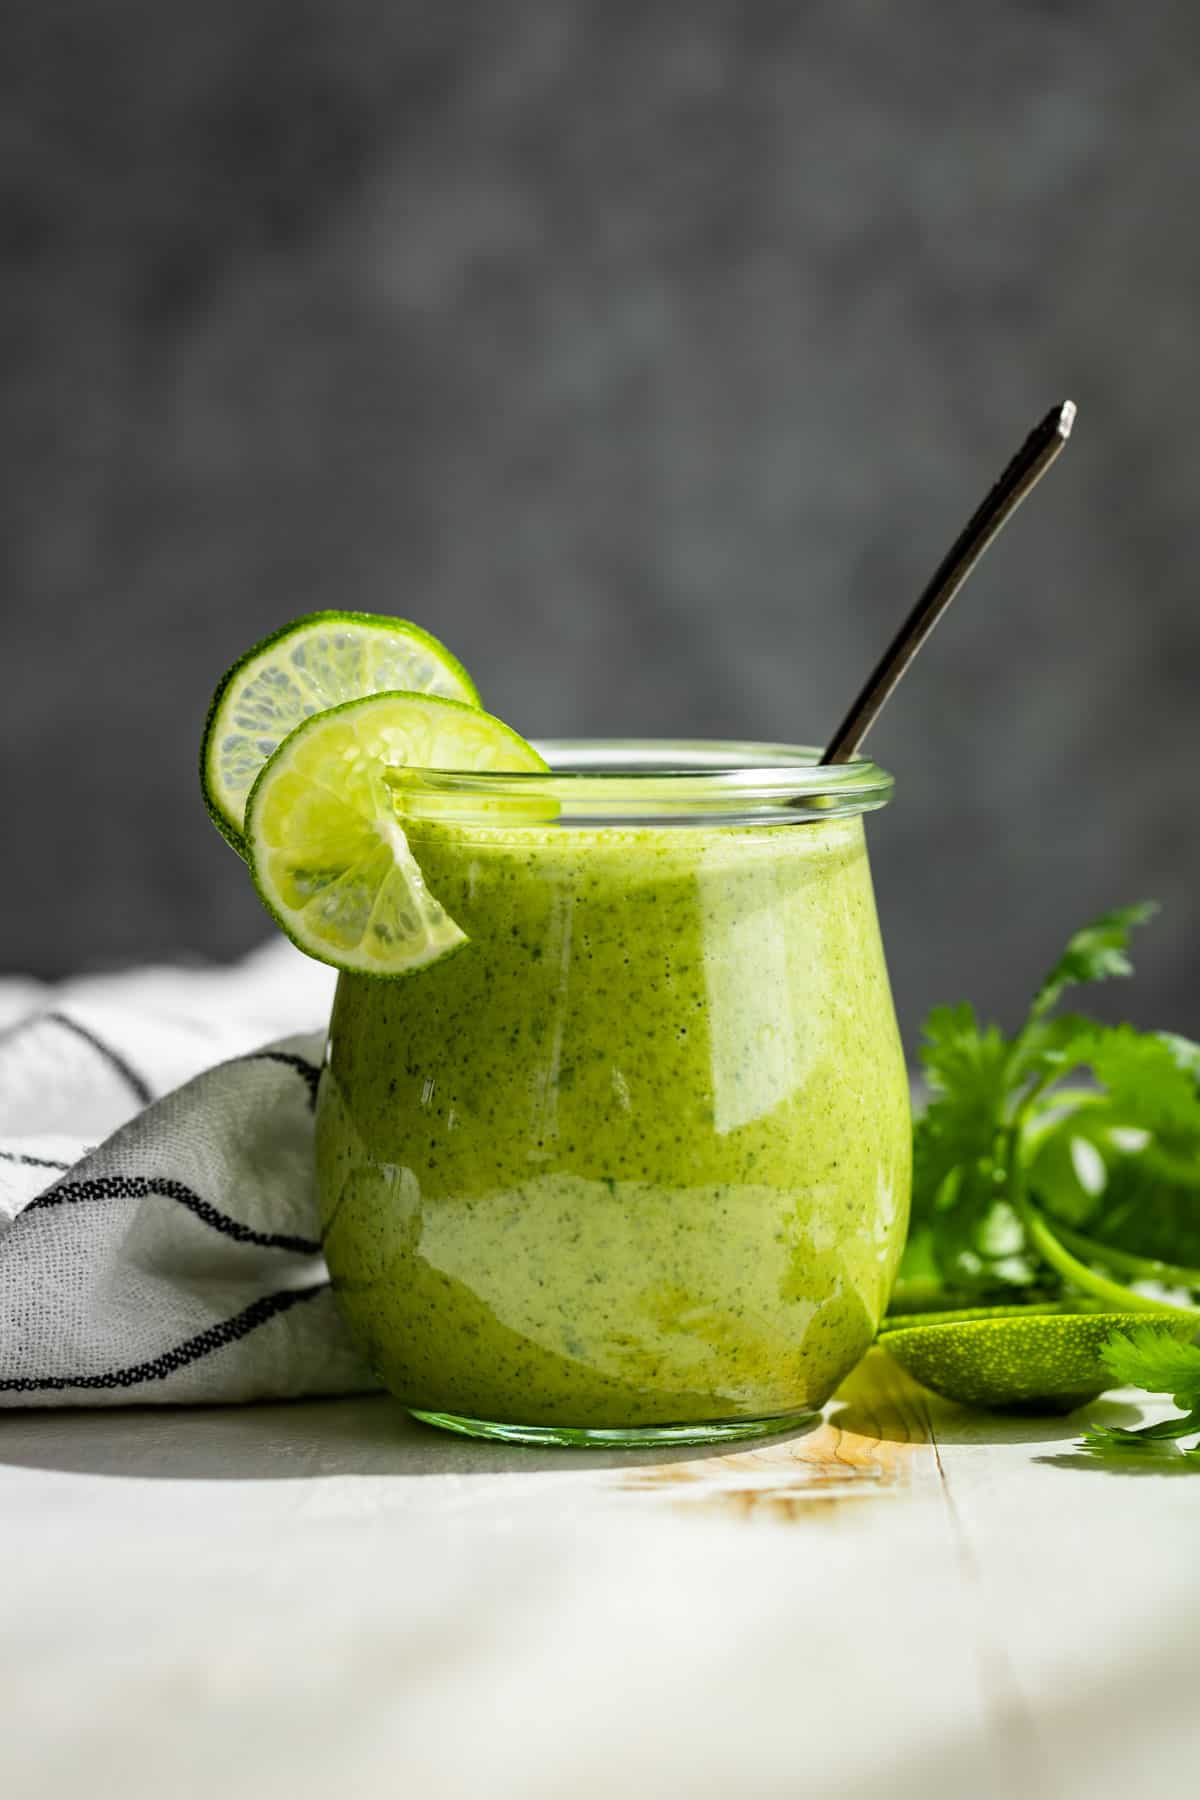 Cilantro Lime Dressing in a small glass jar with lime slices on the side and a silver spoon.